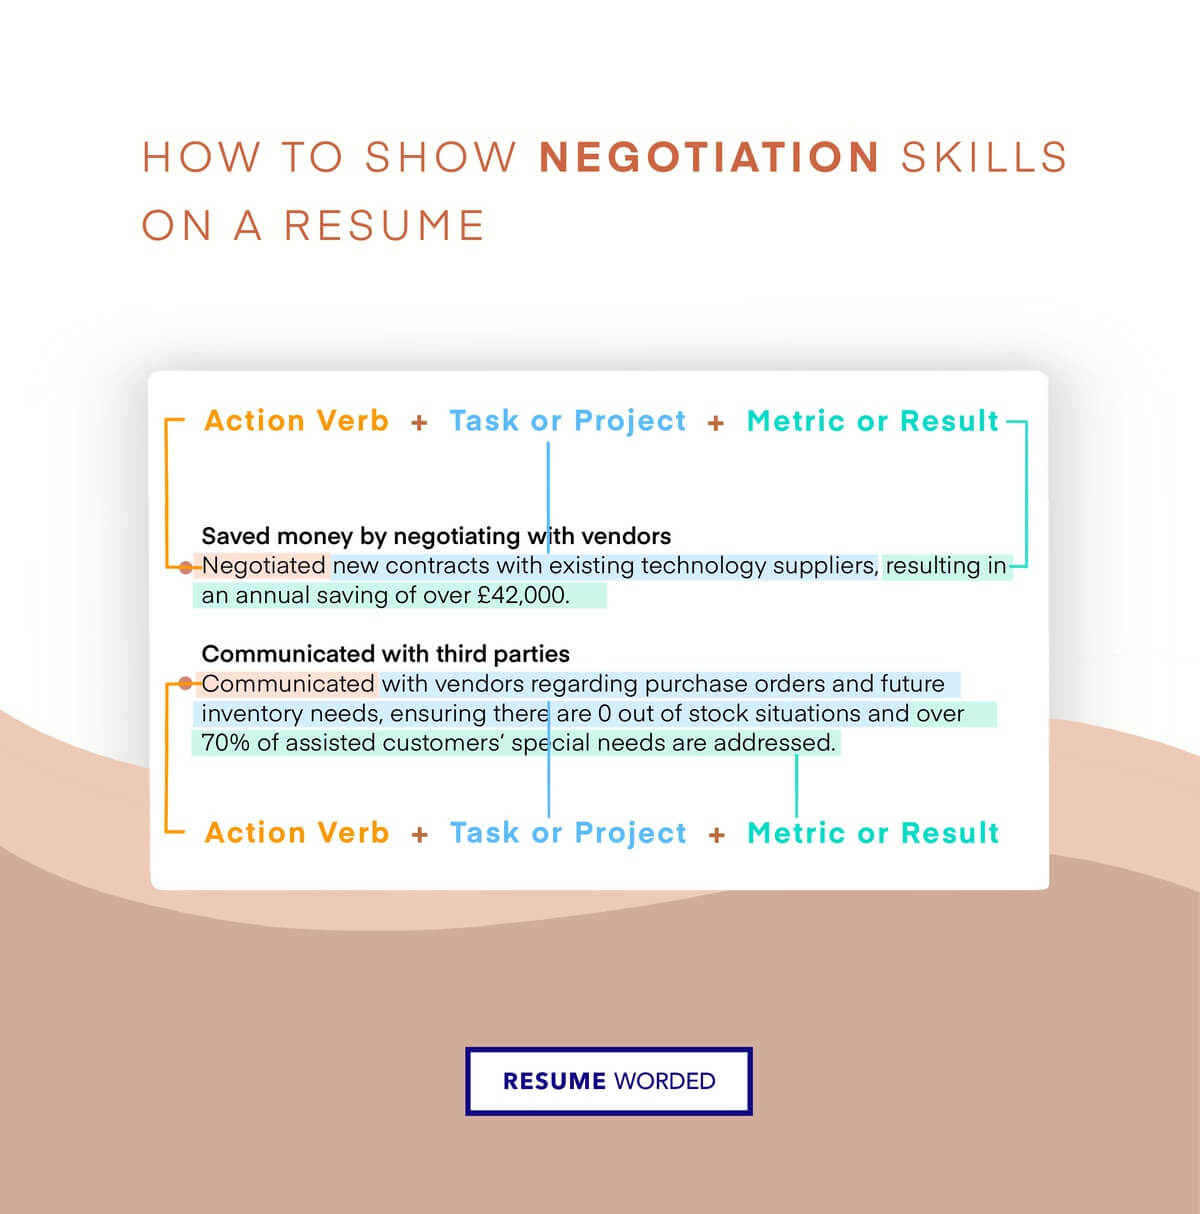 Showcase negotiation and communication skills - Supply and Import Planner CV